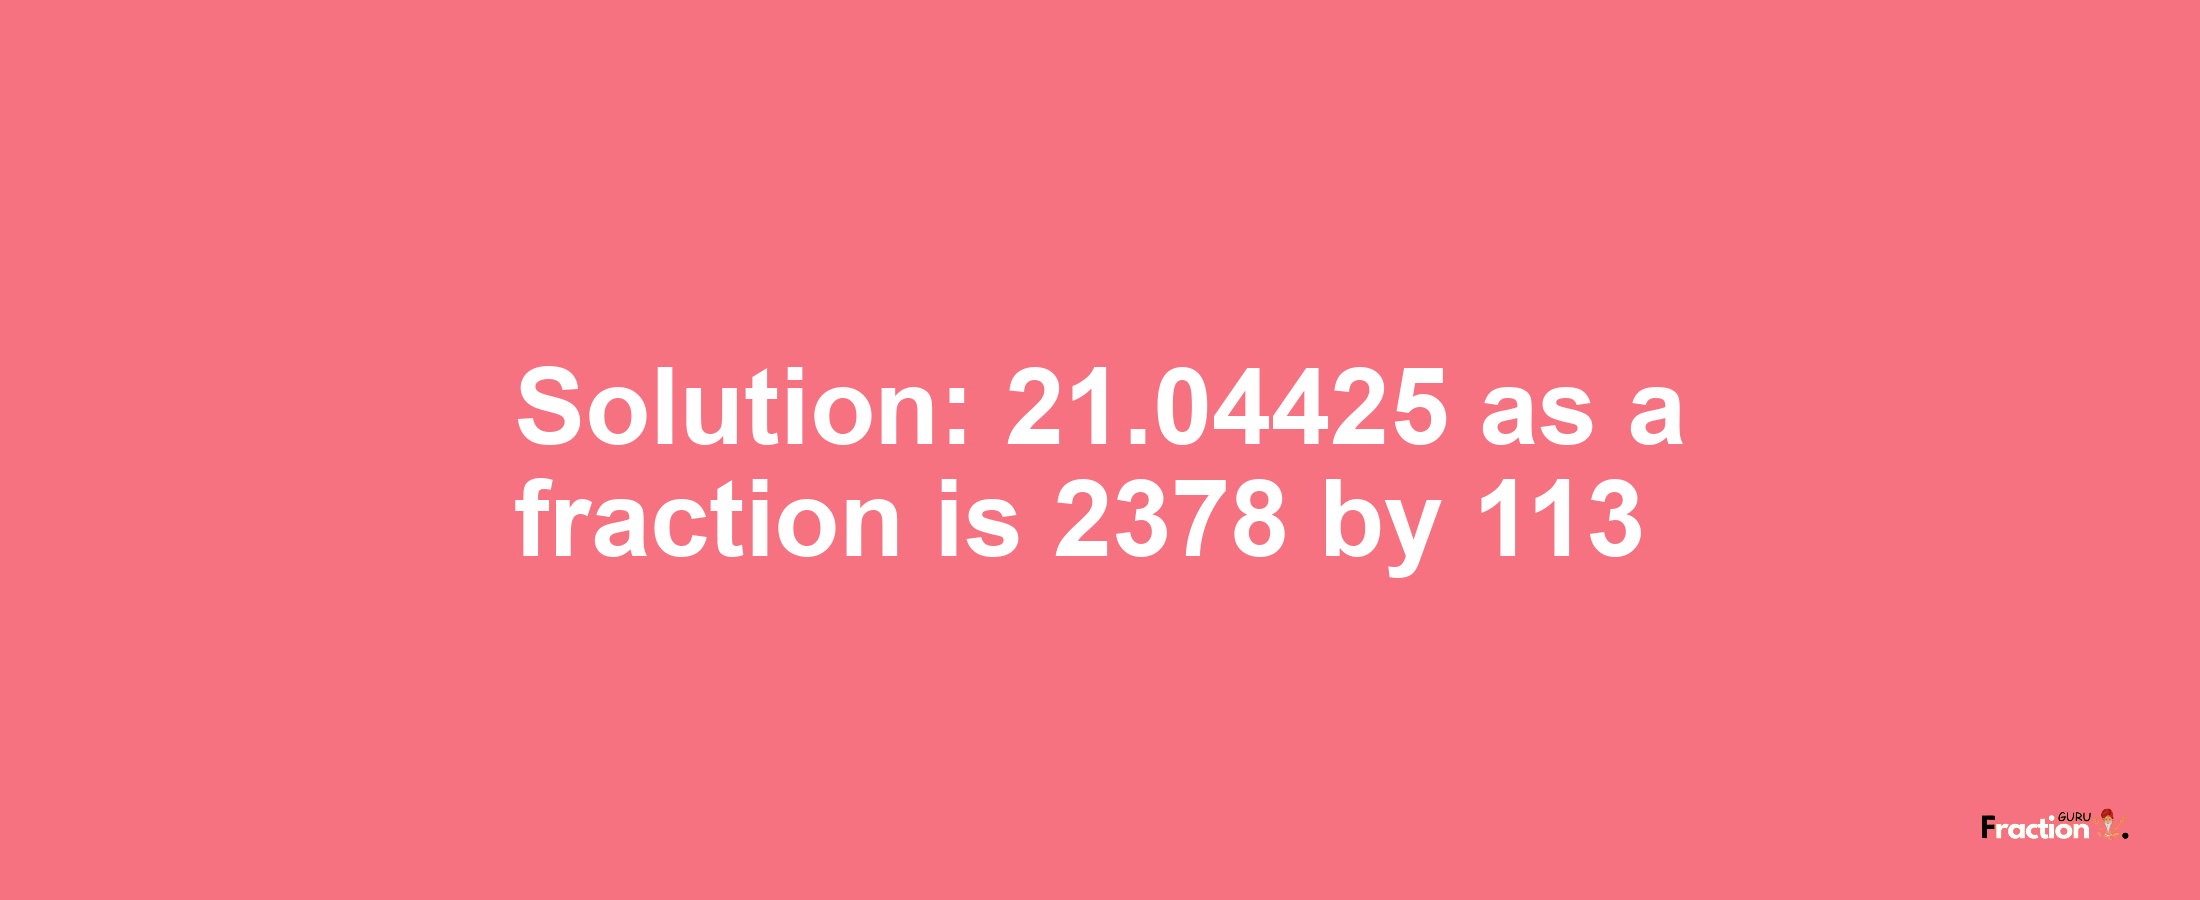 Solution:21.04425 as a fraction is 2378/113